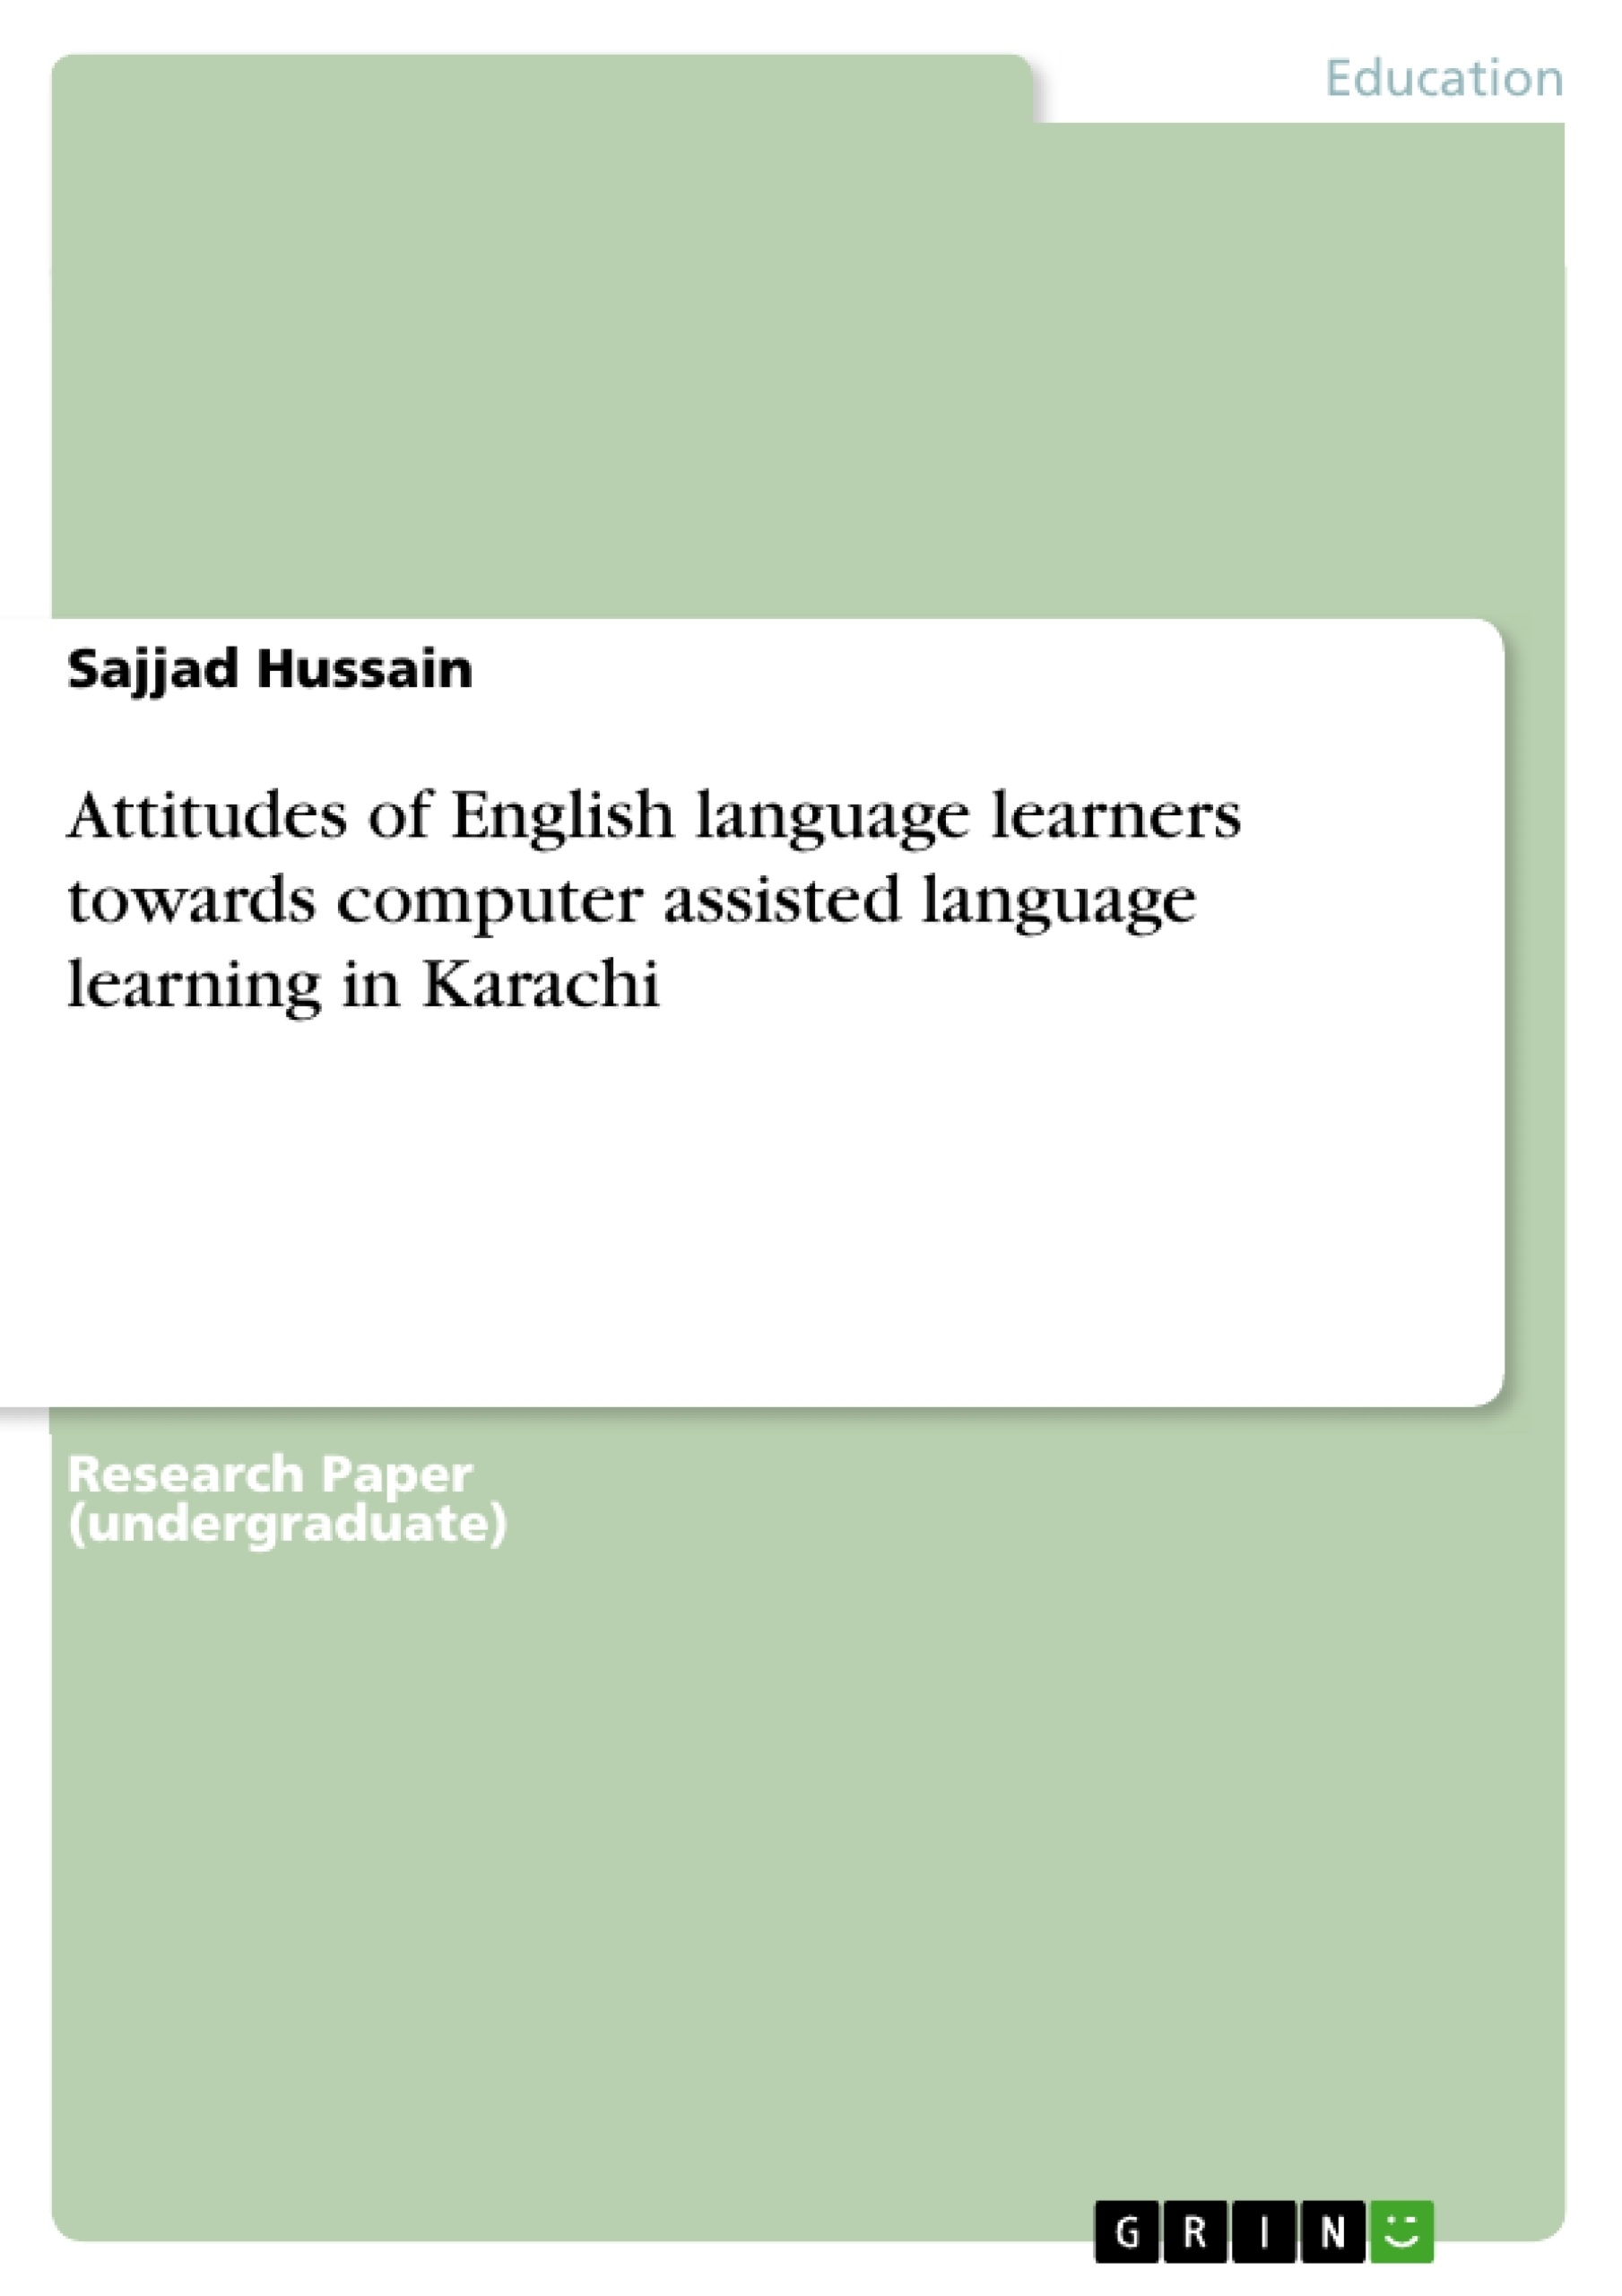 Titre: Attitudes of English language learners towards computer assisted language learning in Karachi